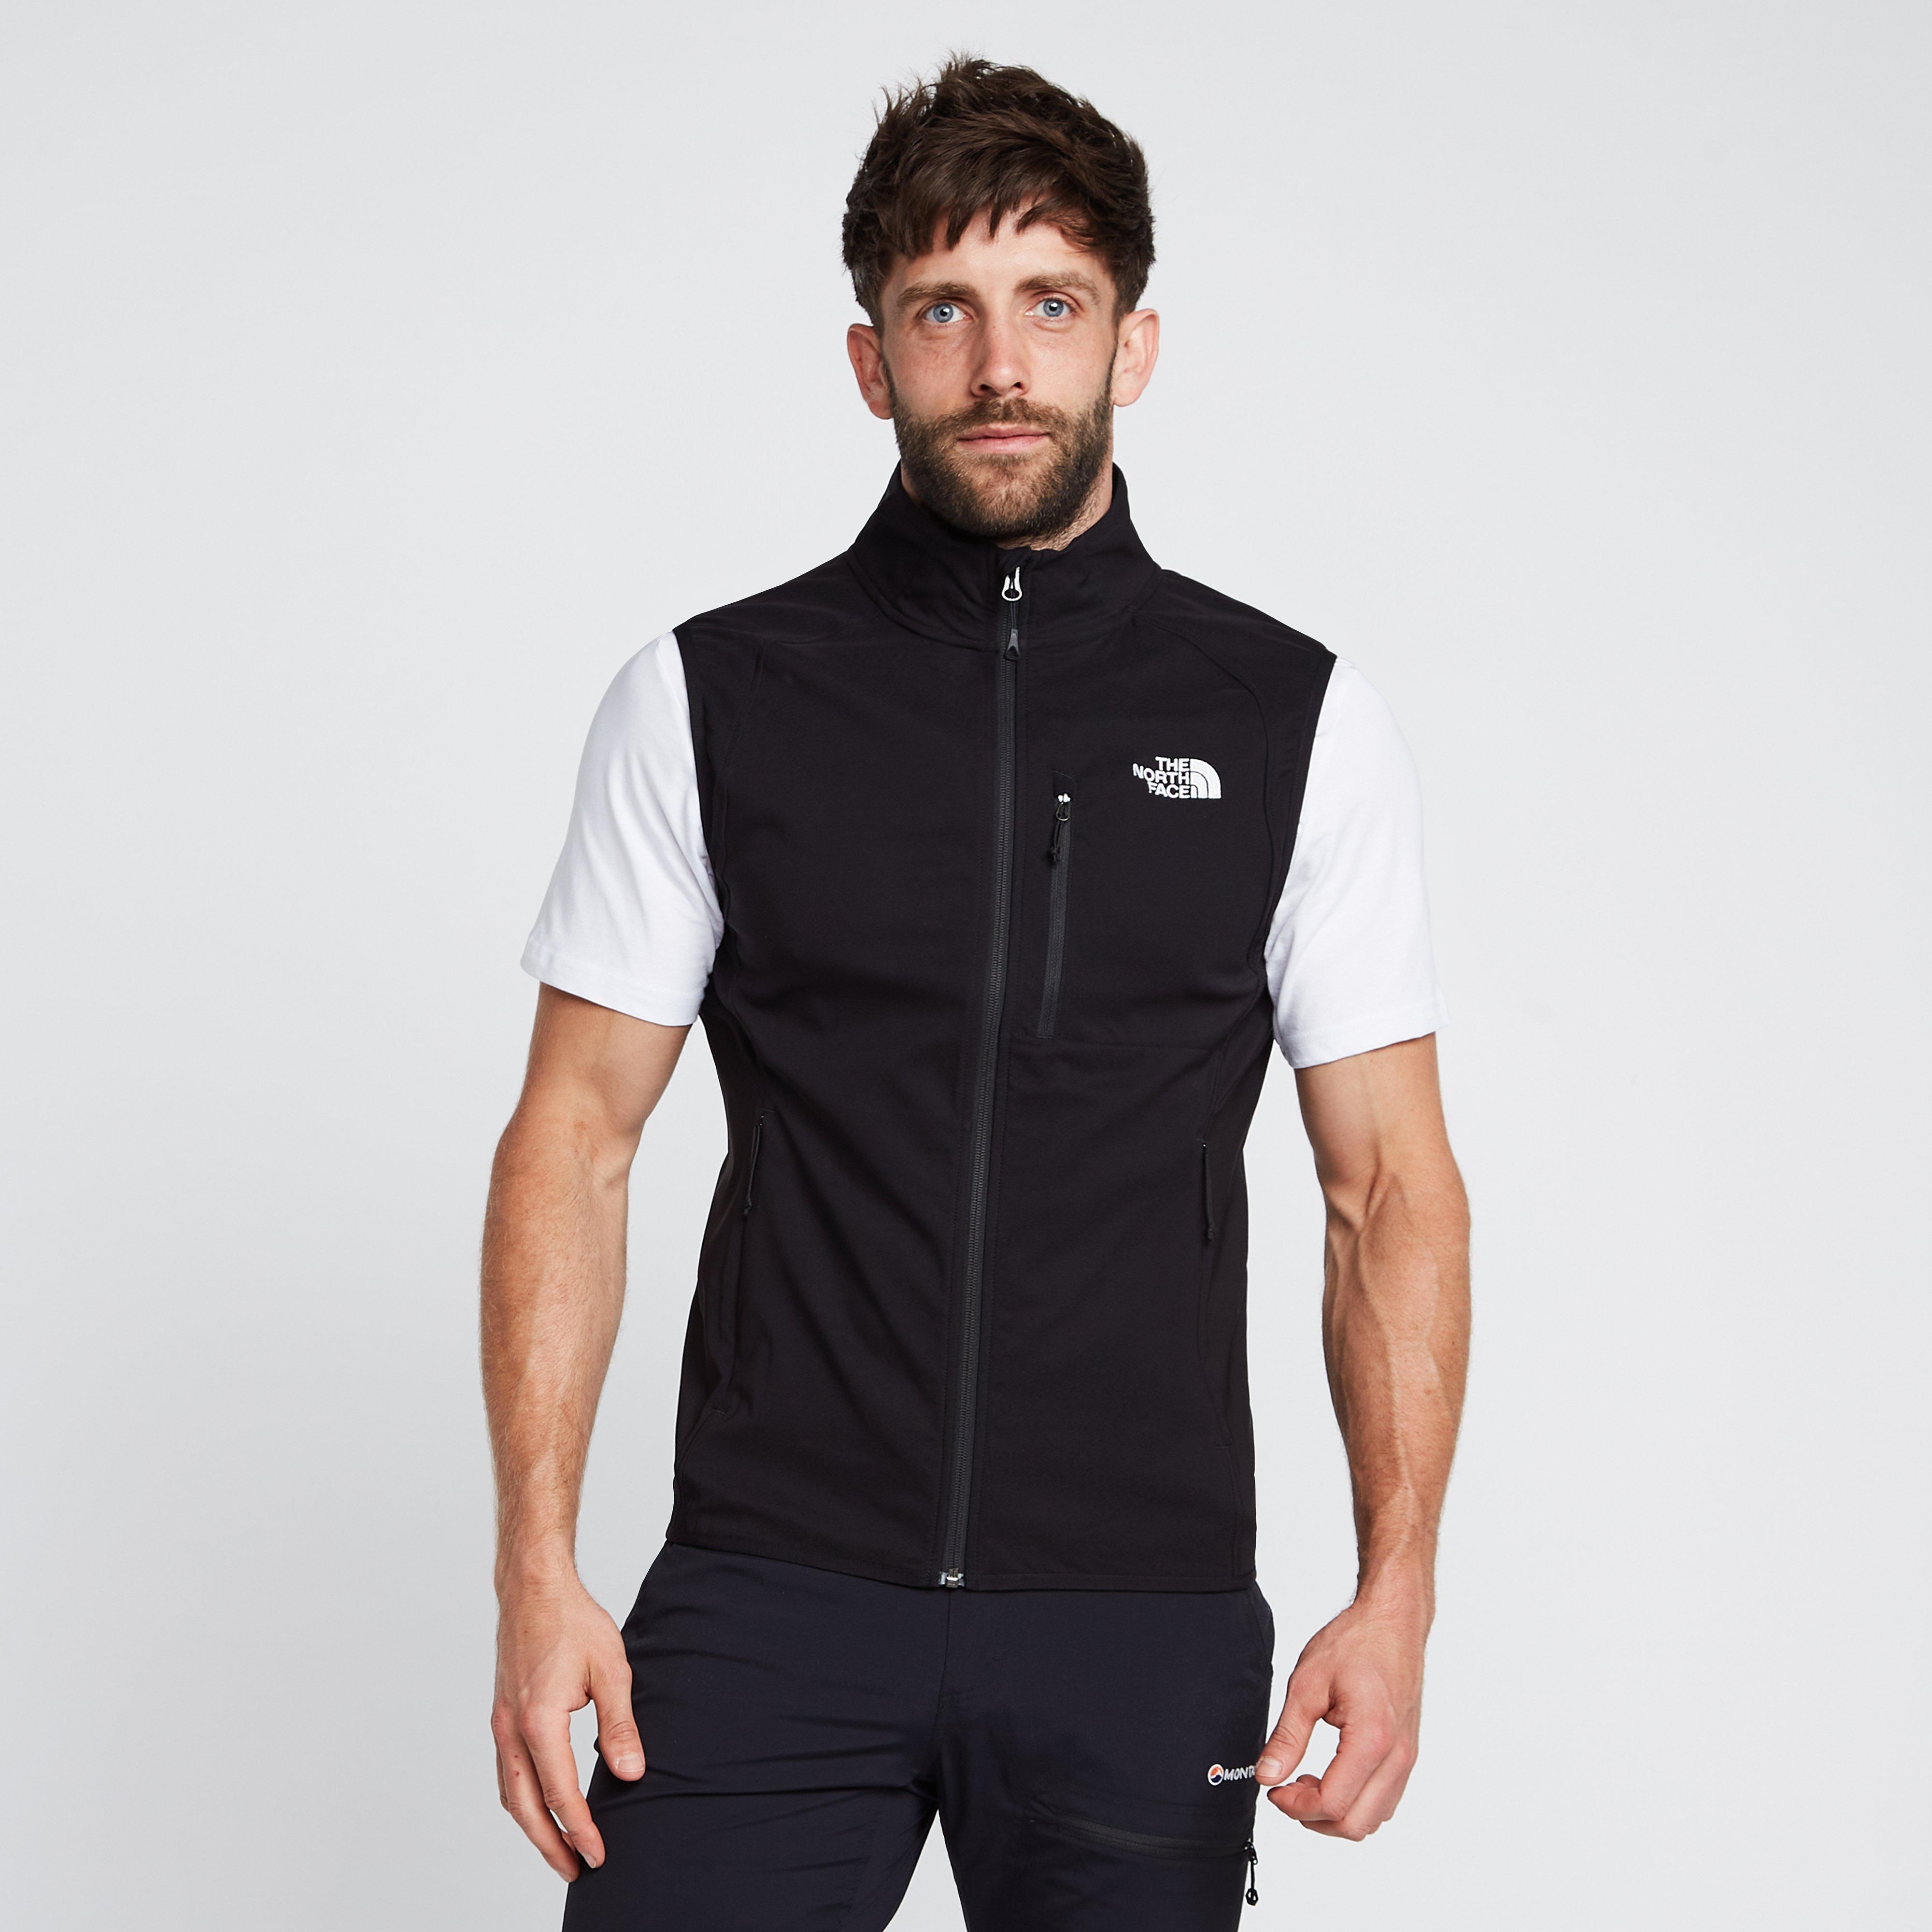 The North Face The North Face Nimble Gilet - Black, Black